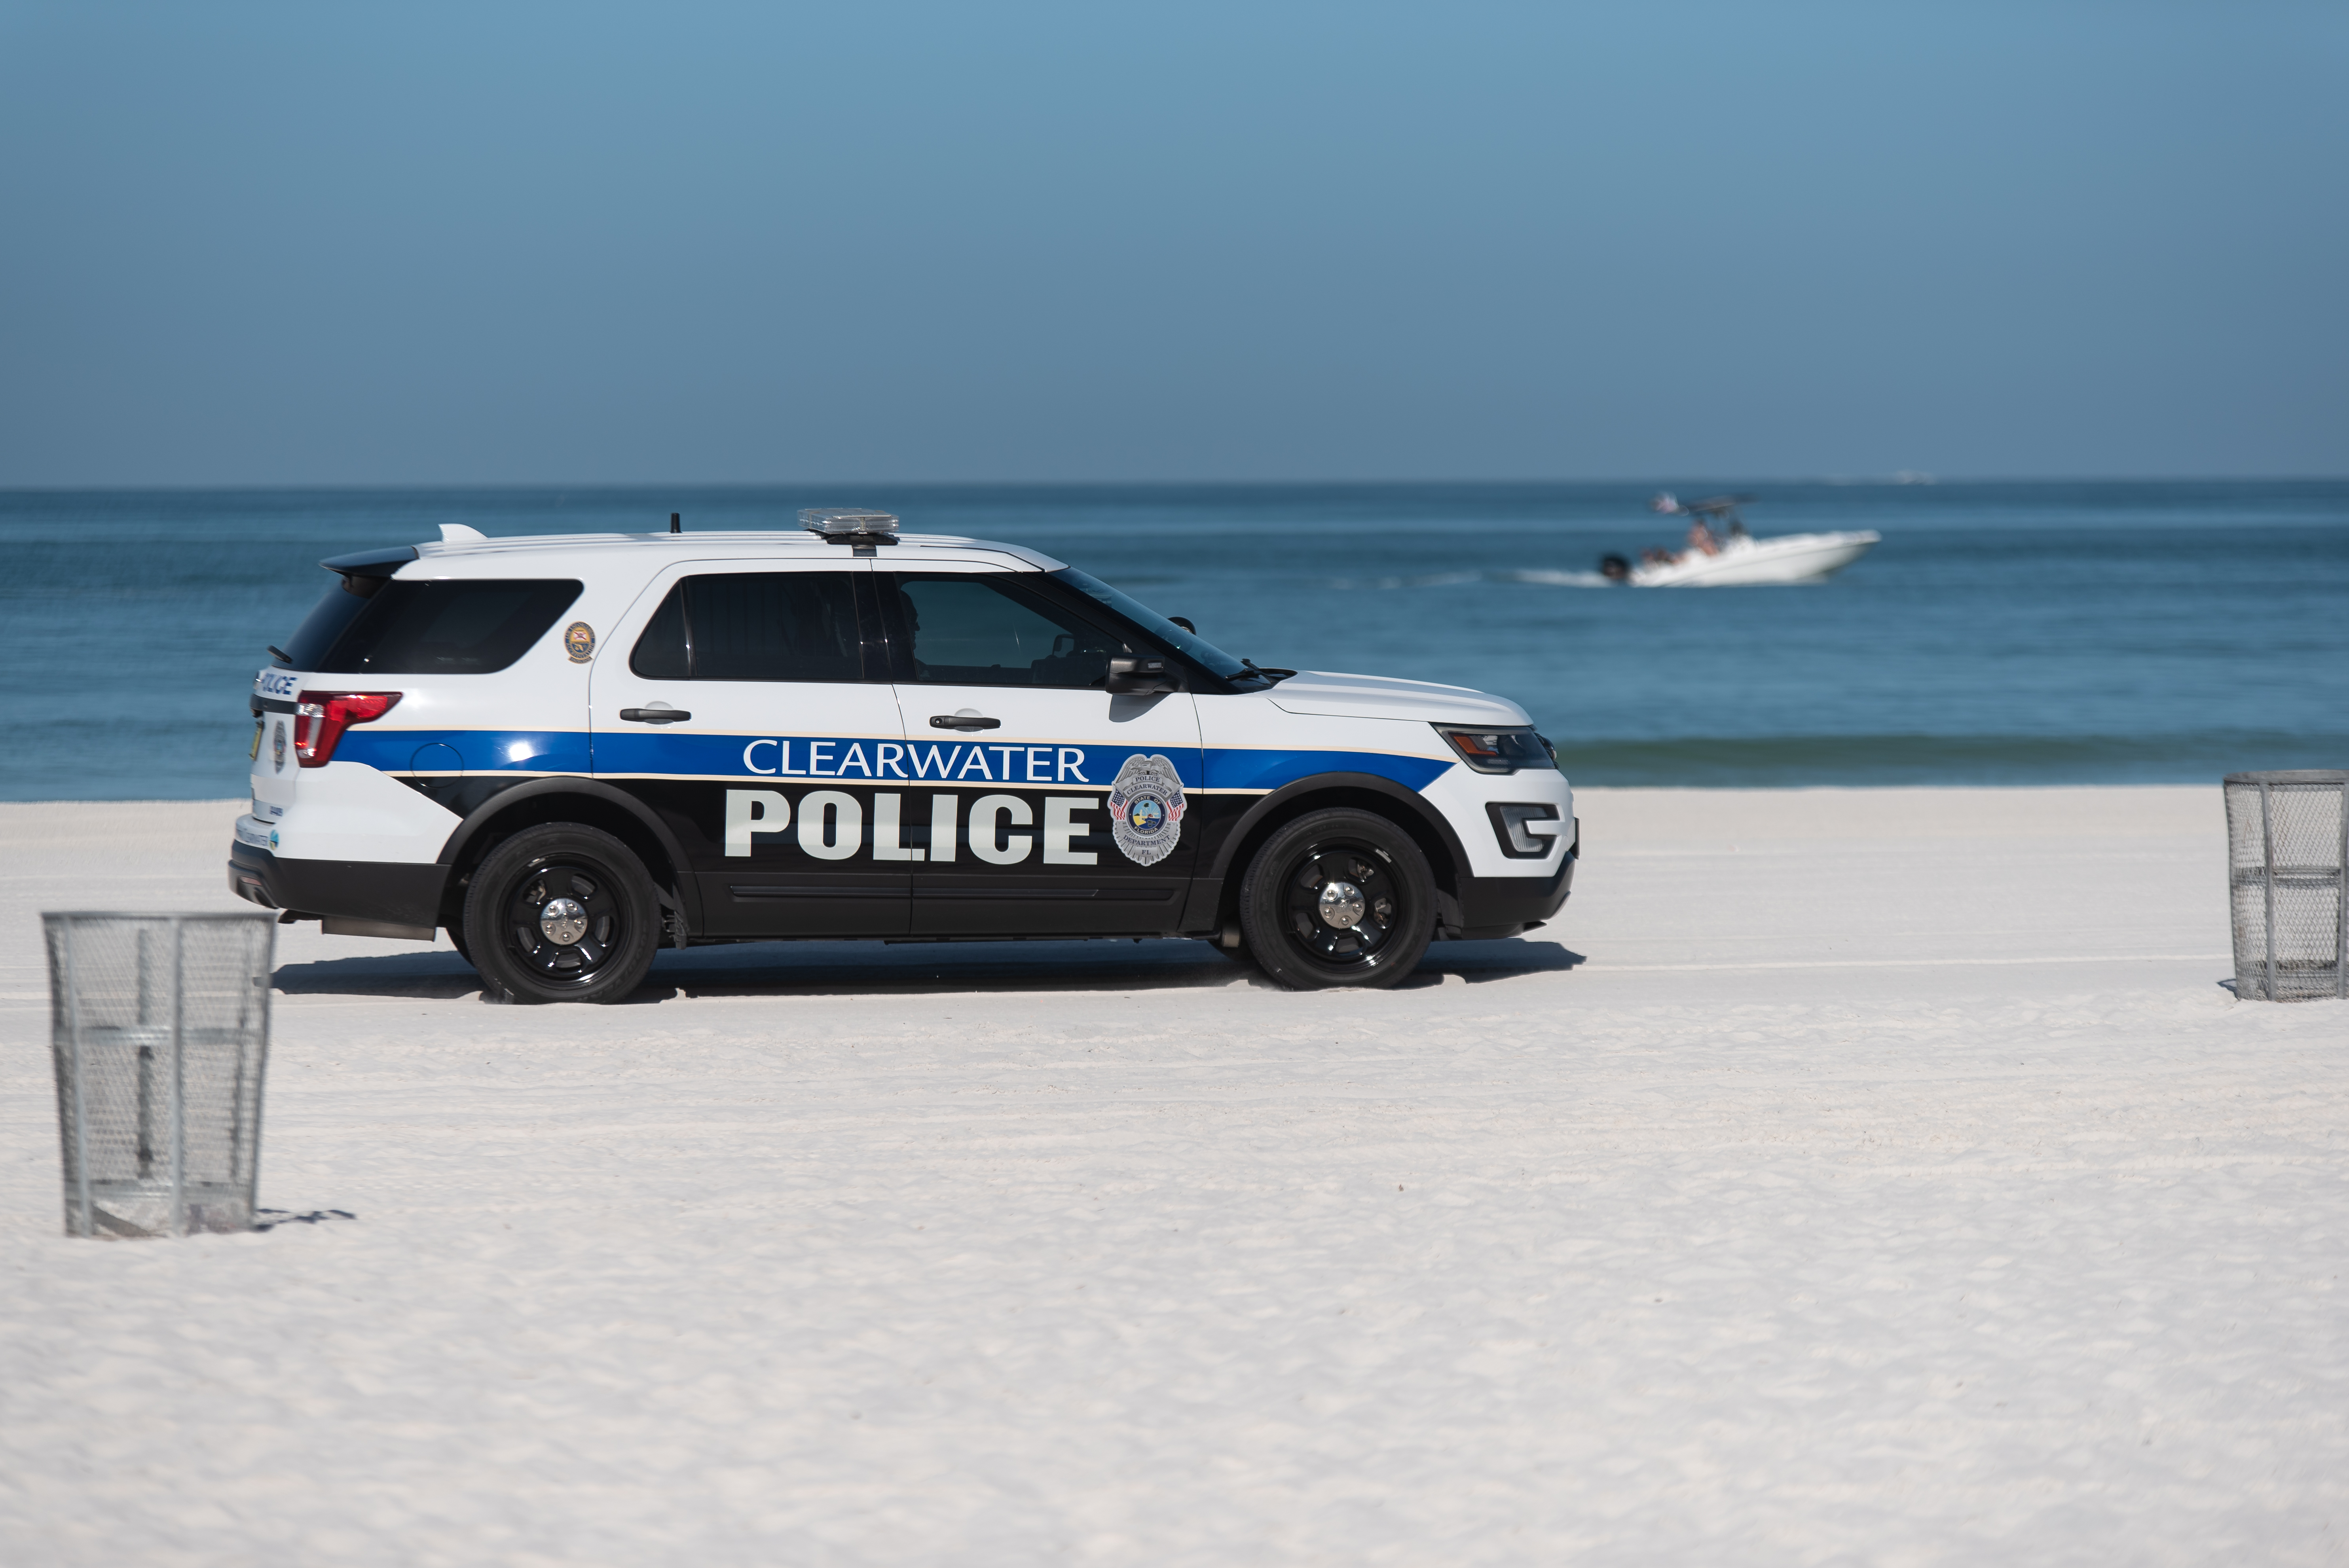 Clearwater police car on beach